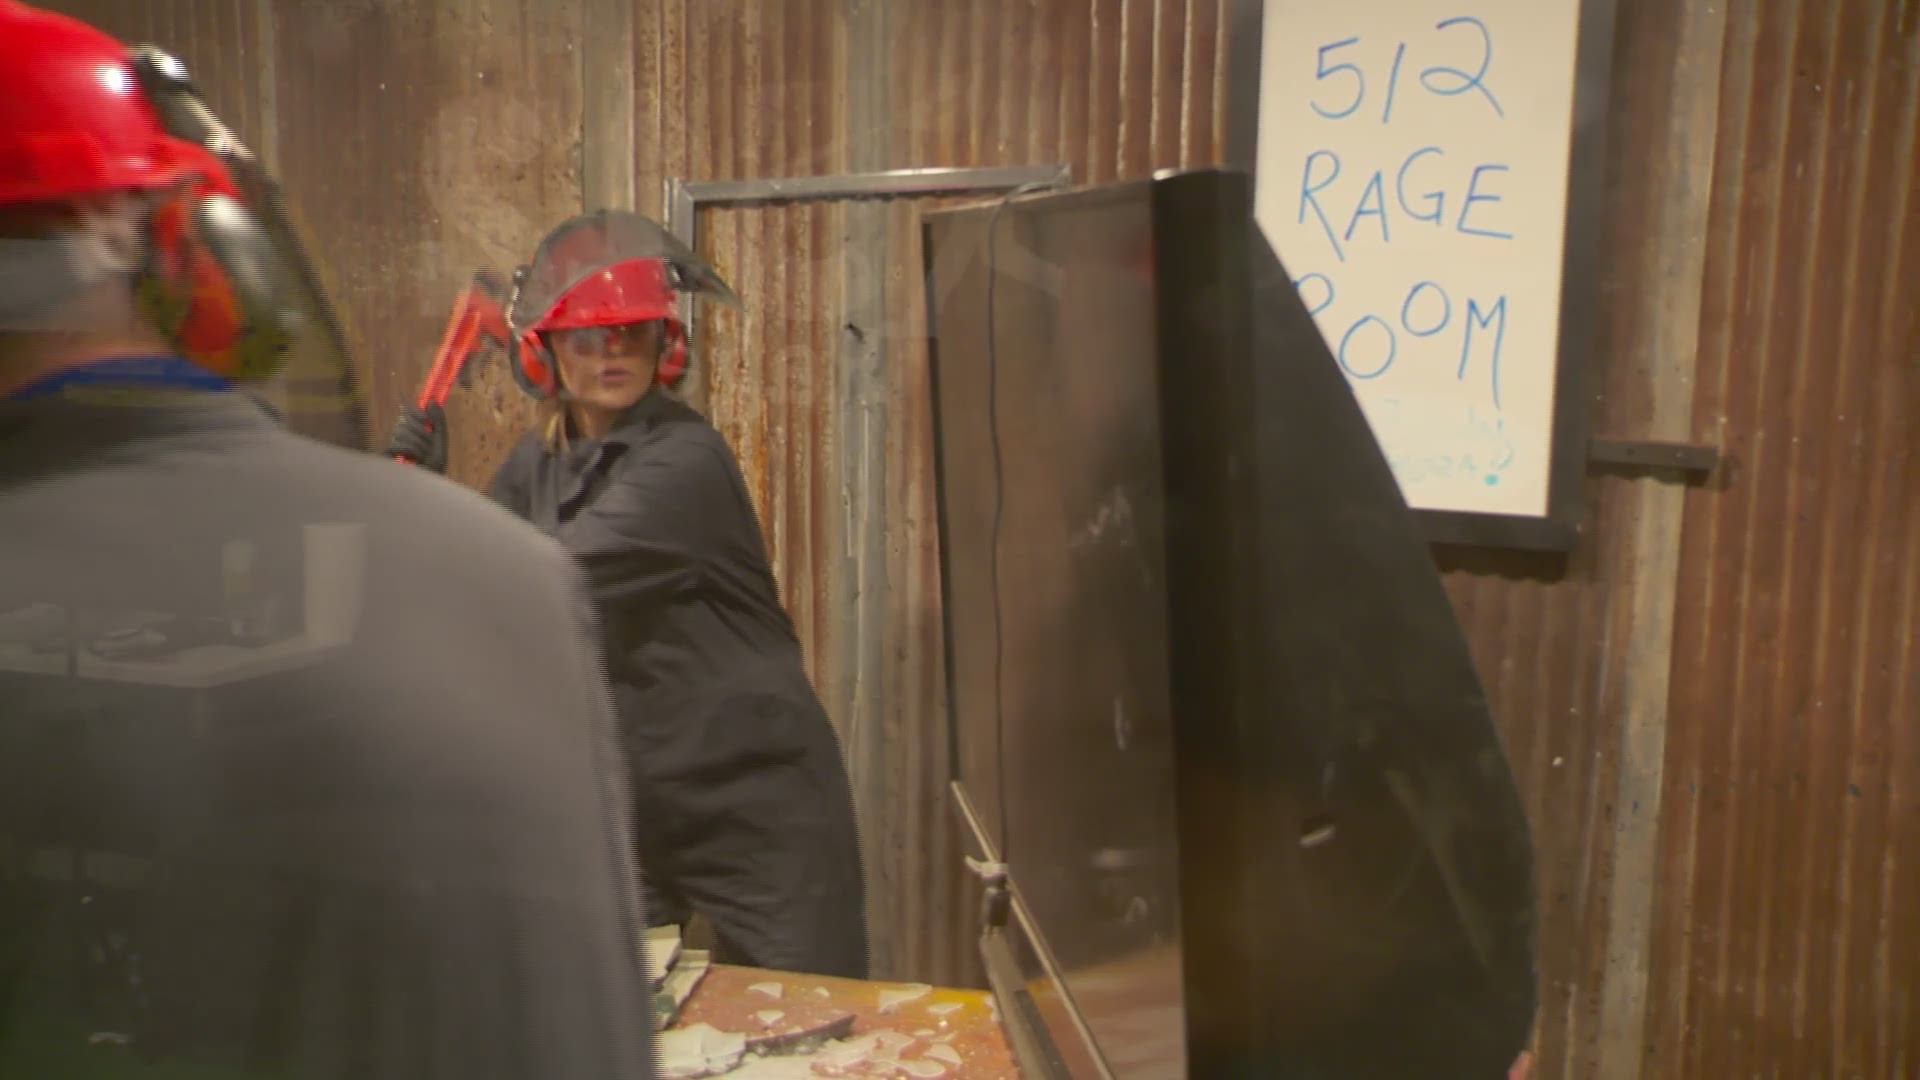 Damon Fogley is the owner of the 512 Rage Room. The warehouse is full of rows and shelves of used, old and unwanted junk ranging from flat-screen TVs and old computer monitors to coffee mugs, dishes and more. That's where visitors get to choose what exactly they want to smash and break.